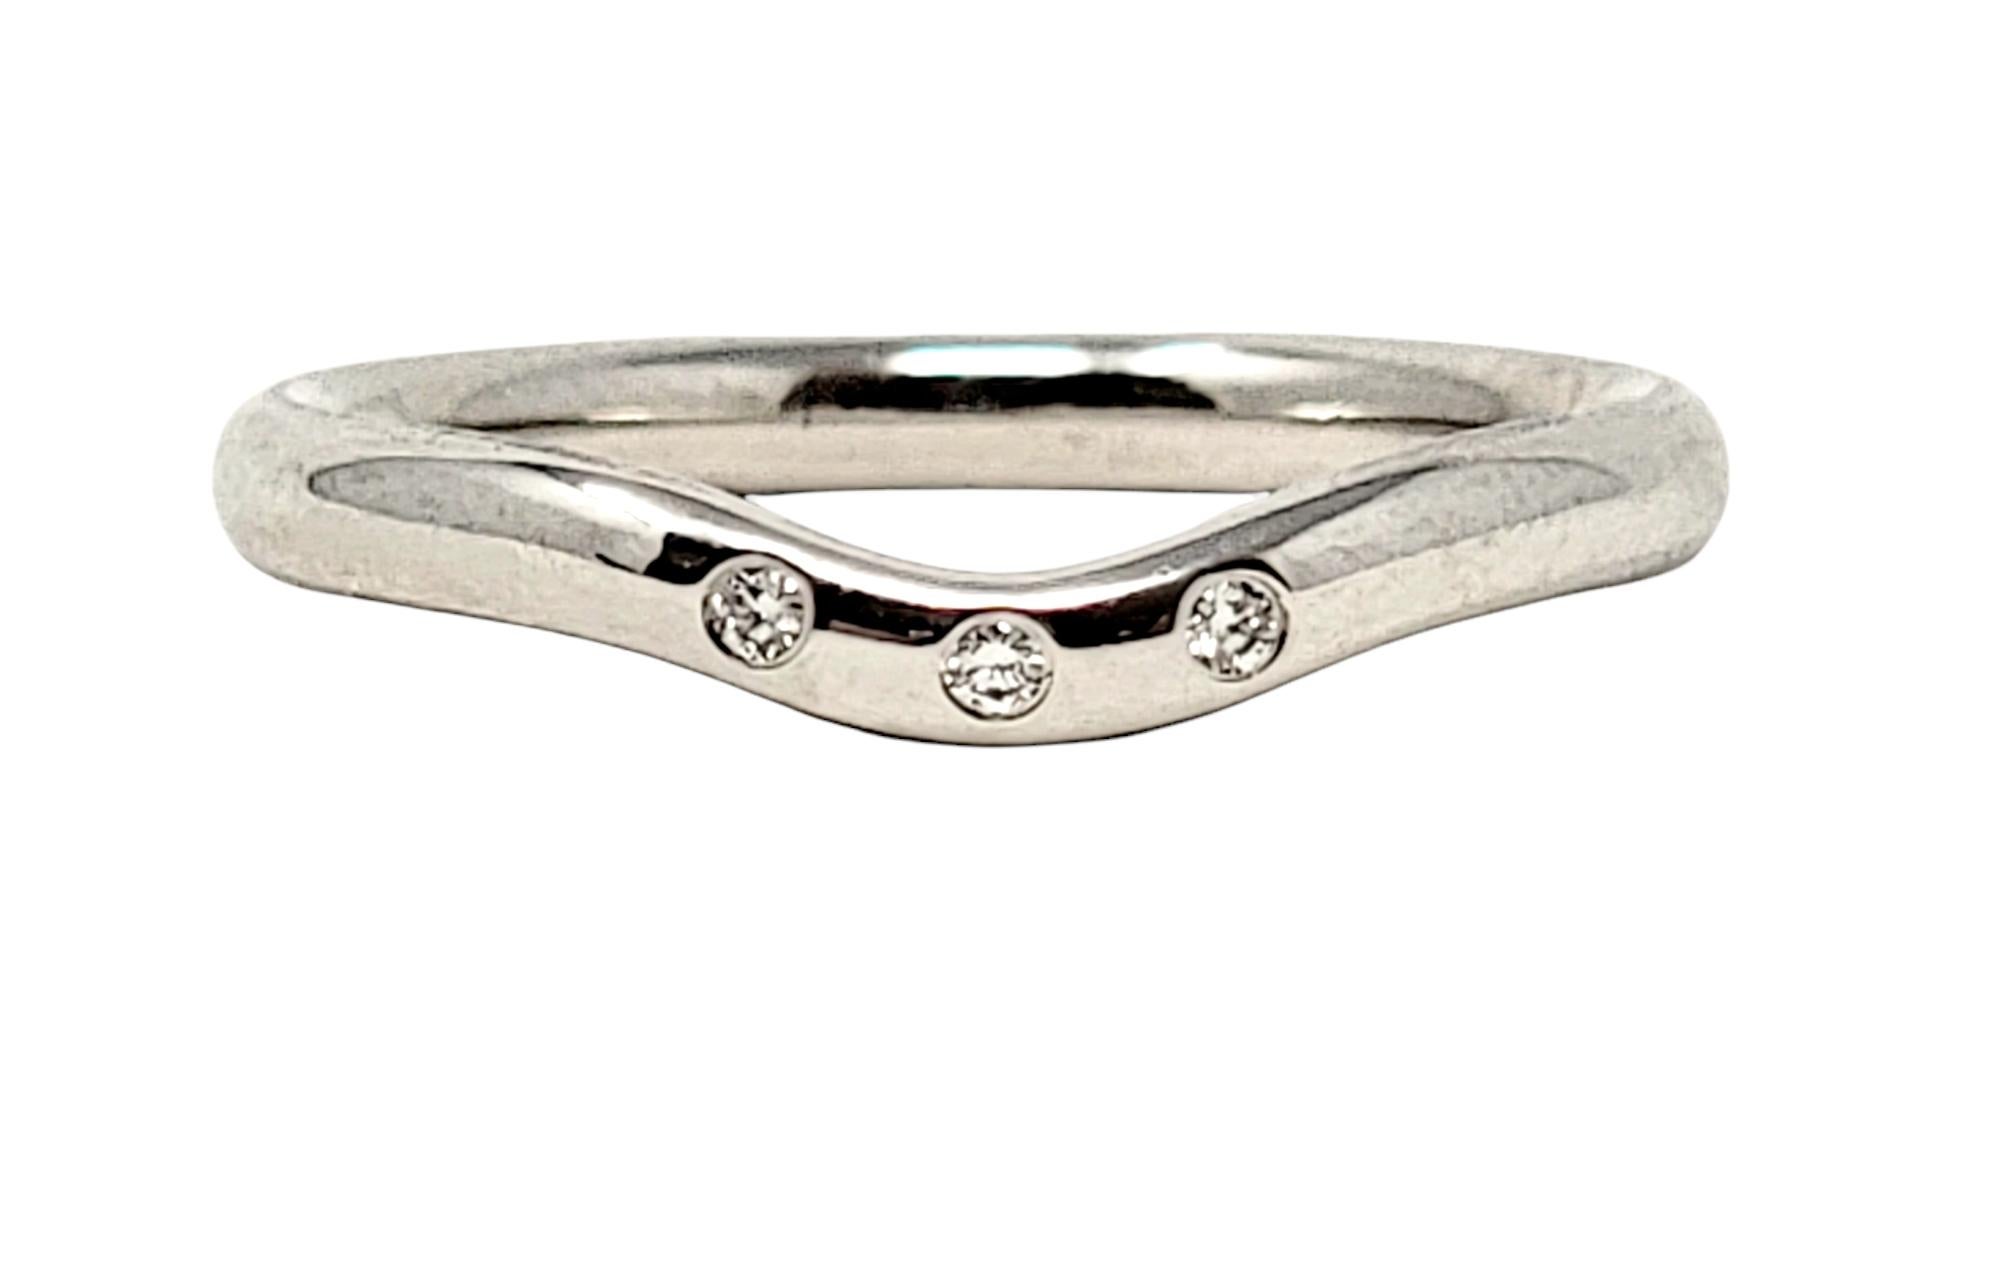 Ring size: 5

Beautiful contemporary wedding band ring by Elsa Peretti for Tiffany & Co.. This sculptural piece features 3 small round diamonds at the center, where the band curves slightly to accommodate an engagement ring. The perfect addition to